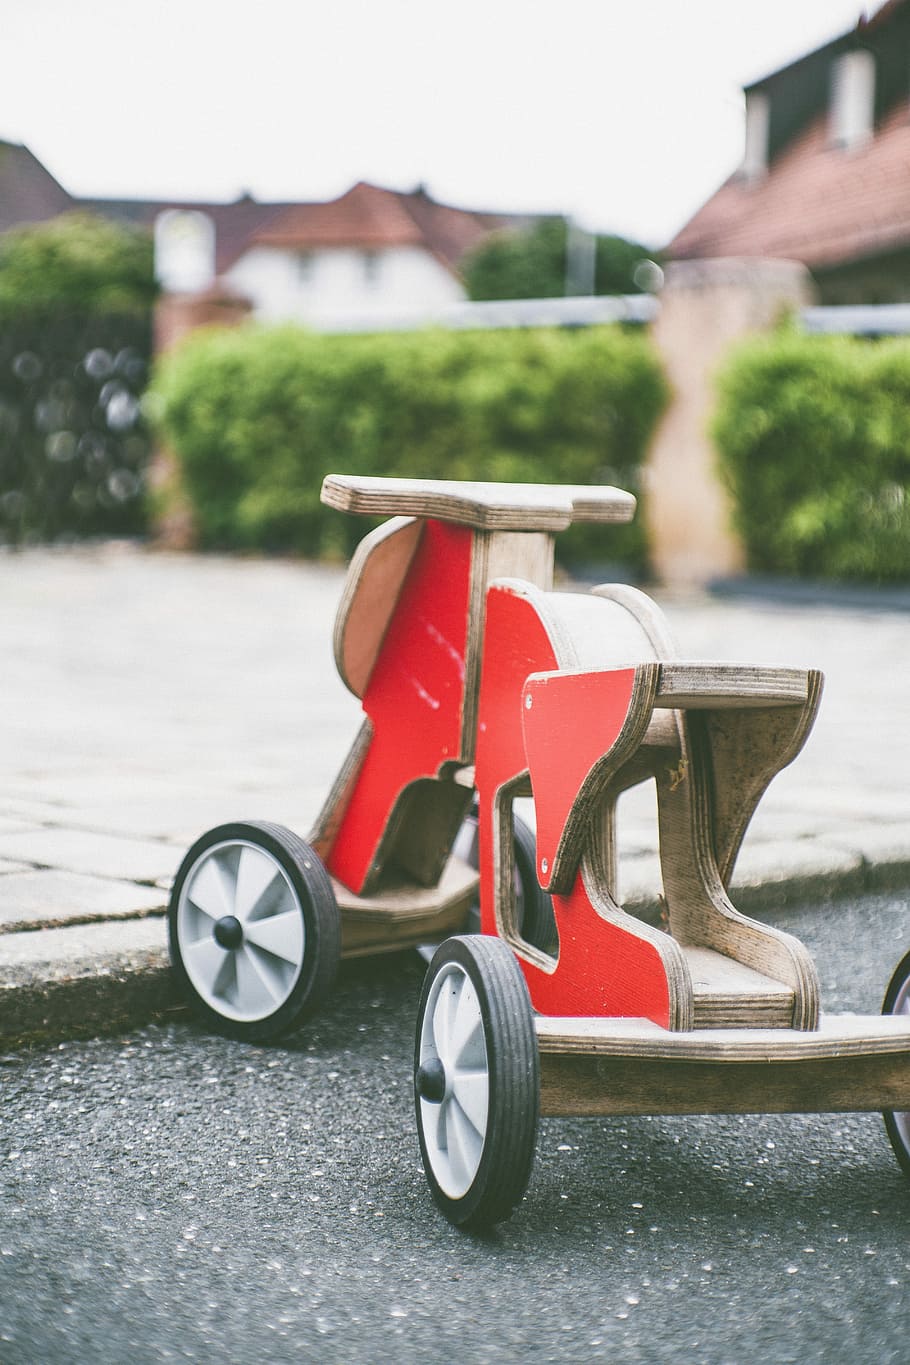 toddler's red and brown wooden ride-on toy on concrete pavement, phoot of red and brown wooden ride-on toy on gray surface, HD wallpaper